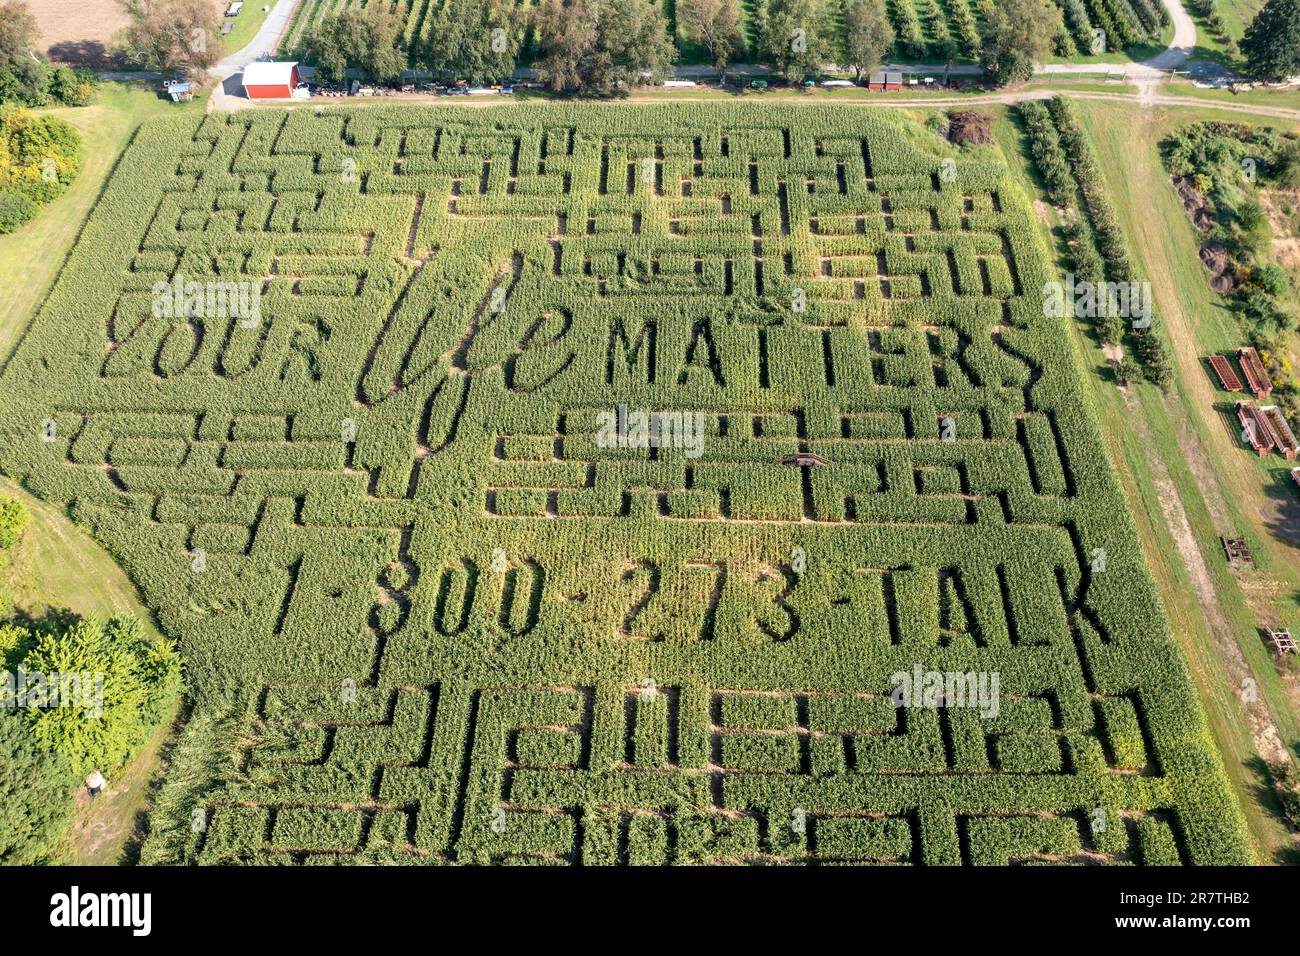 Richland, Michigan, A corn maze with a suicide prevention theme at Gull Meadow Farms Stock Photo